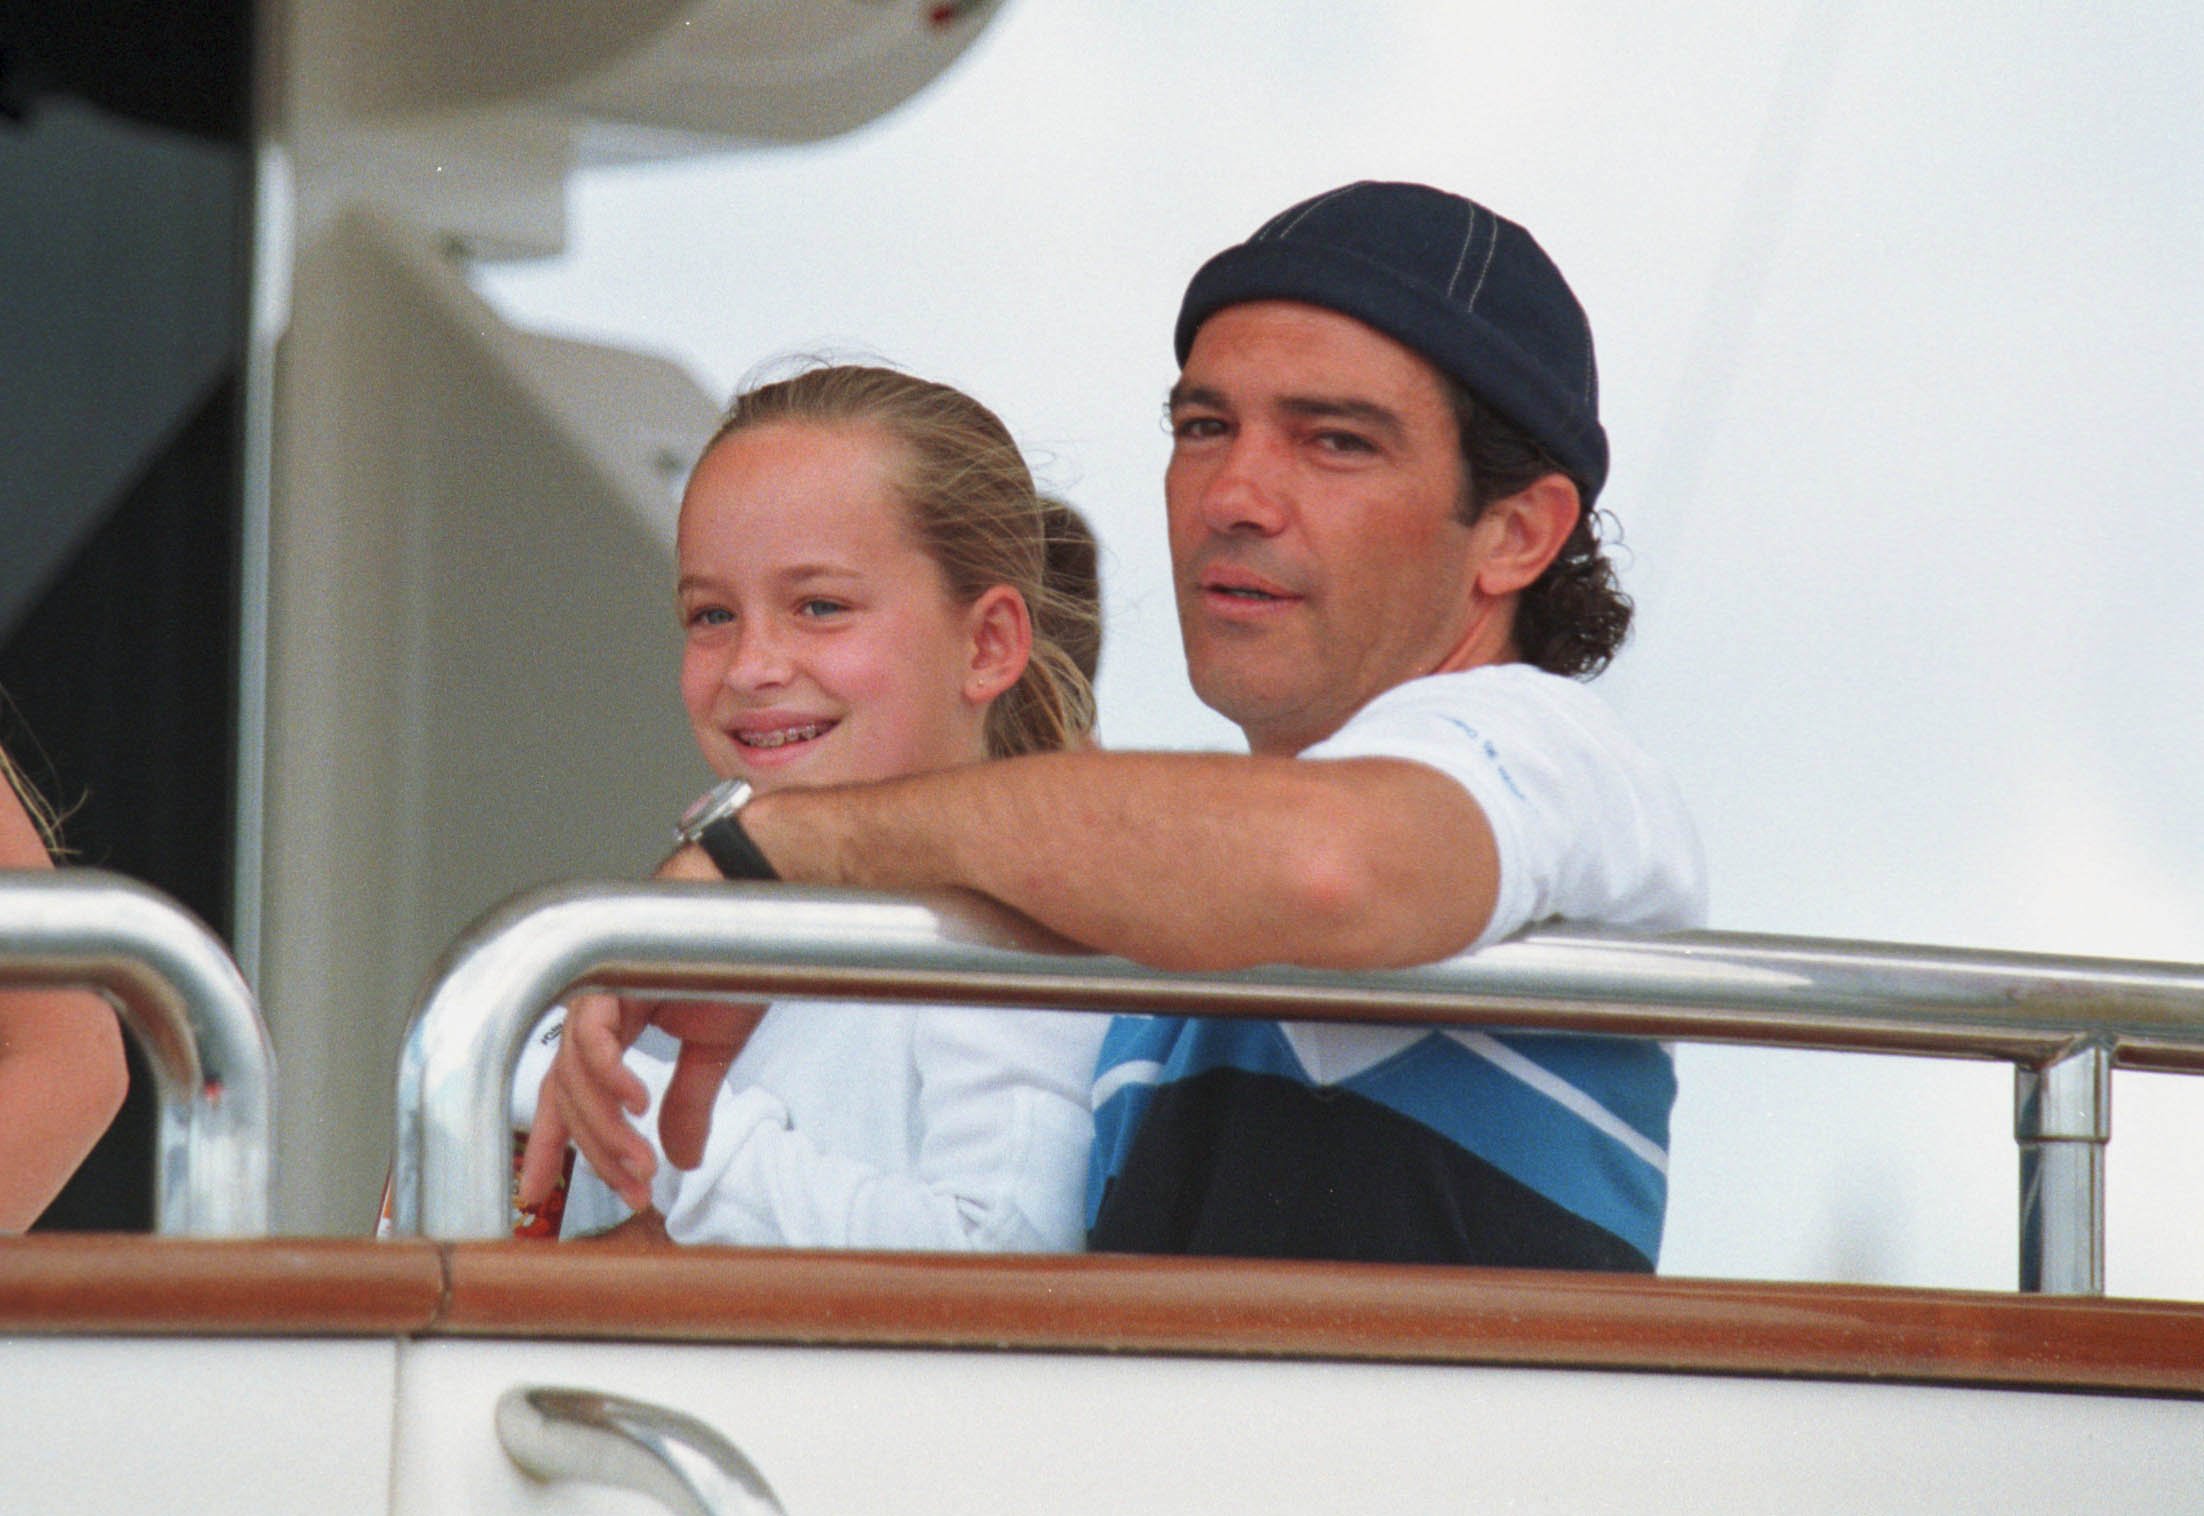 Antonio Banderas with his step-daughter Dakota Johnson during the Copa del Ray regatta on August 6, 2000 | Source: Getty Images